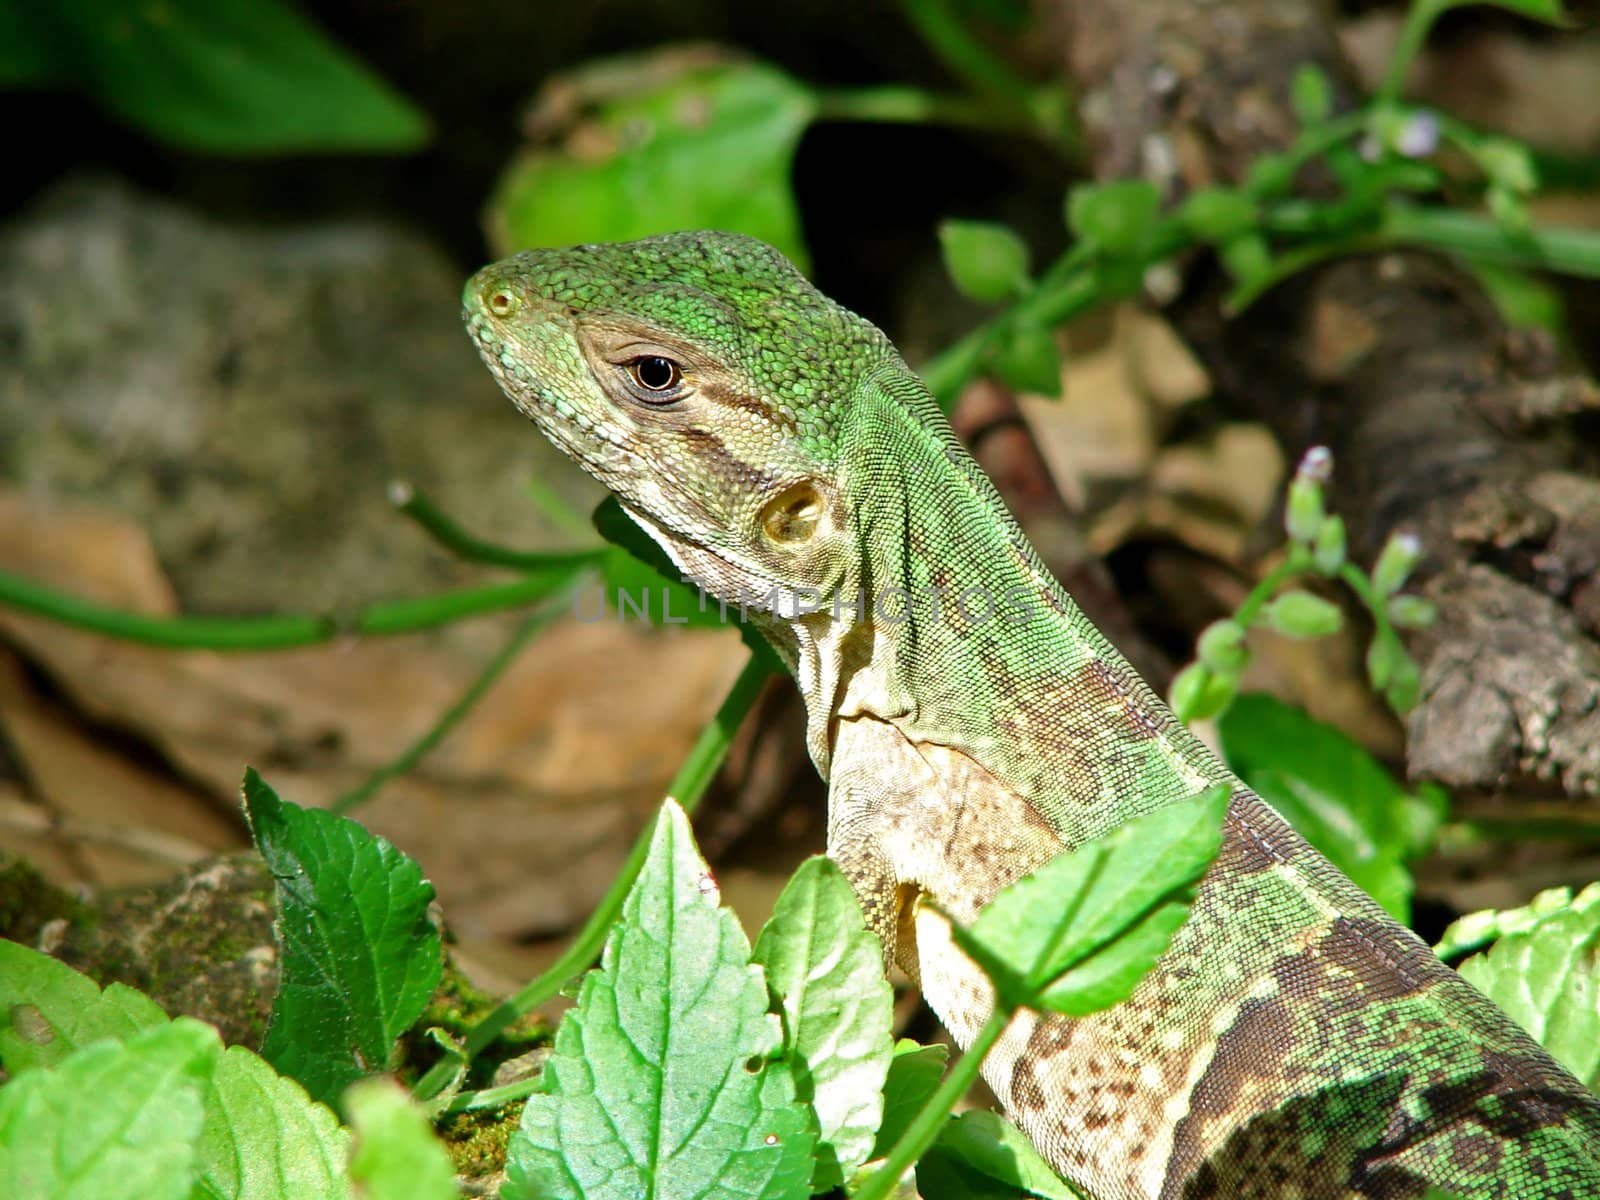 Close-up of a green lizard in the sun on natural background showing details of its skin scales and camouflage.